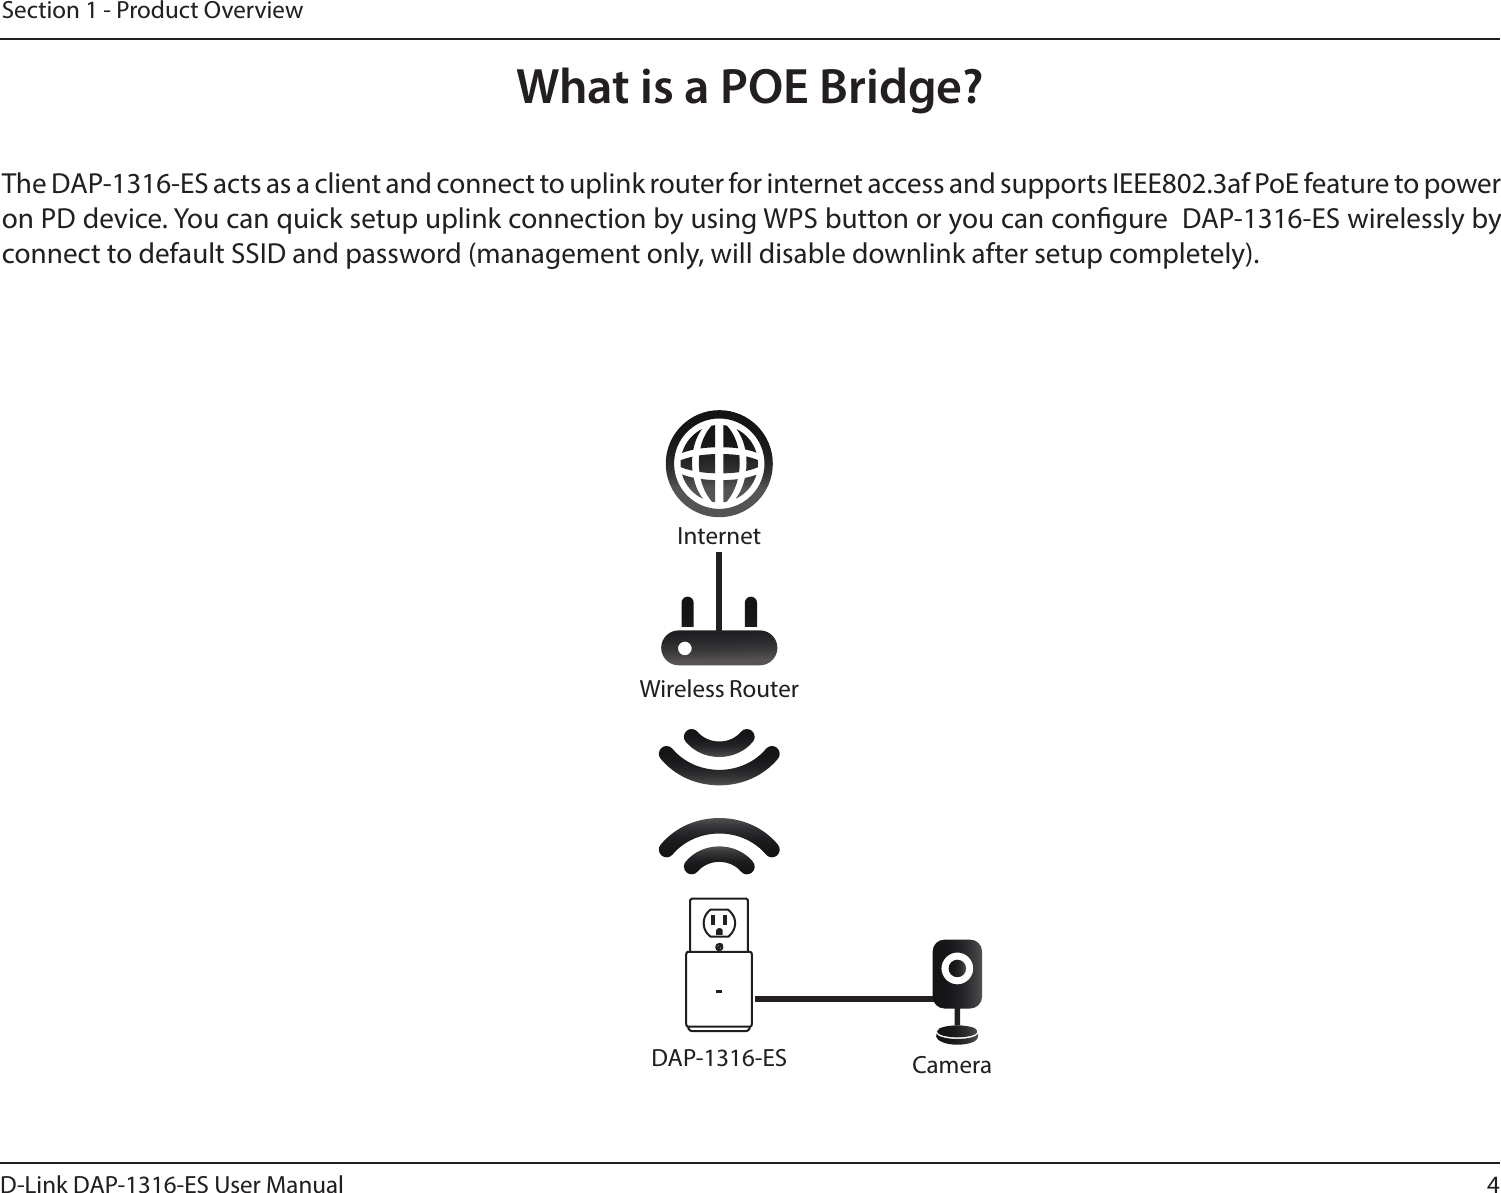 4D-Link DAP-1316-ES User ManualSection 1 - Product OverviewWhat is a POE Bridge?The DAP-1316-ES acts as a client and connect to uplink router for internet access and supports IEEE802.3af PoE feature to power on PD device. You can quick setup uplink connection by using WPS button or you can congure  DAP-1316-ES wirelessly by connect to default SSID and password (management only, will disable downlink after setup completely). CameraWireless RouterInternetDAP-1316-ES